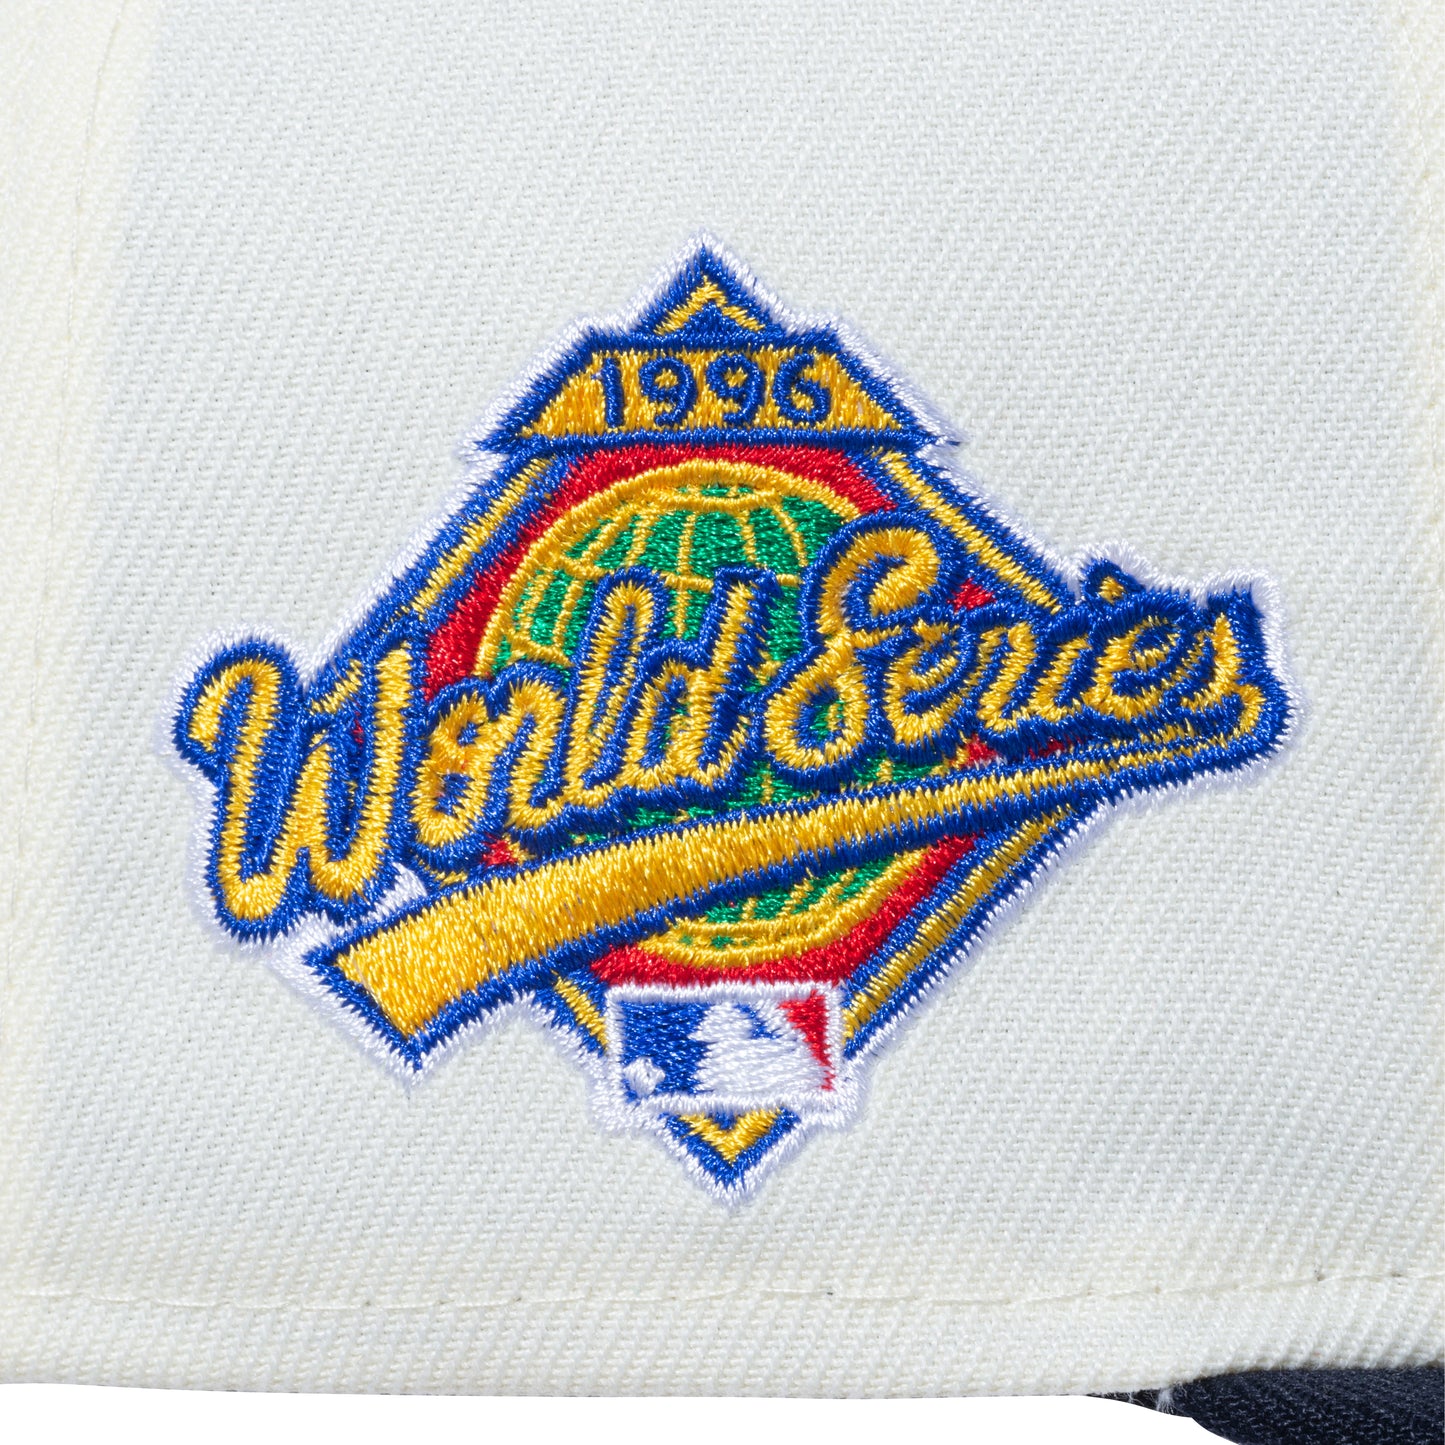 NEW YORK YANKEES 1996 WORLD SERIES TWO-TONE 59FIFTY